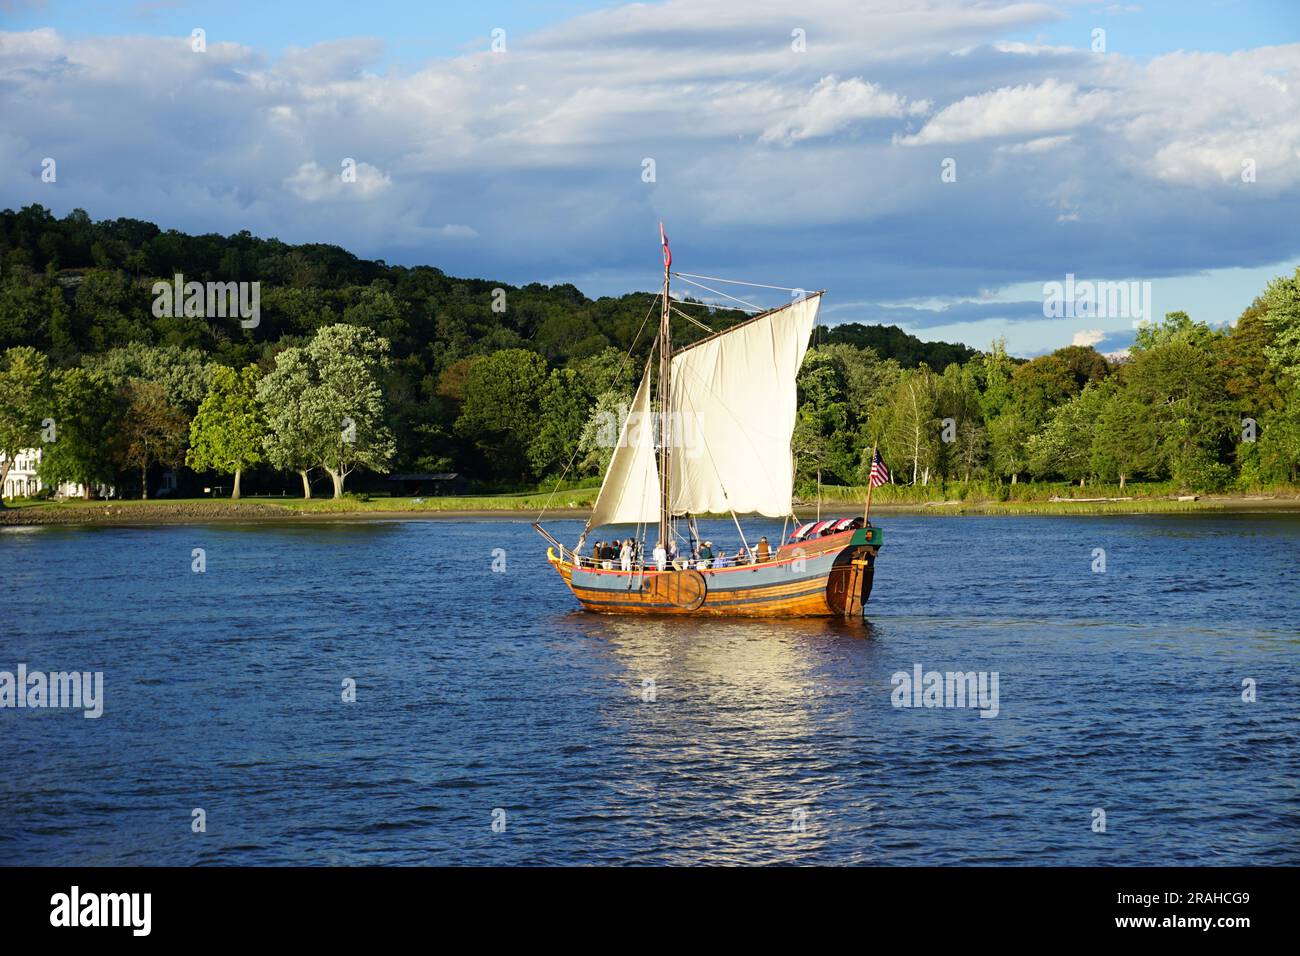 A modern replica of the Onrust, the first Dutch ship built in America in 1614, sails on the Connecticut River on a sunny fall day. Stock Photo